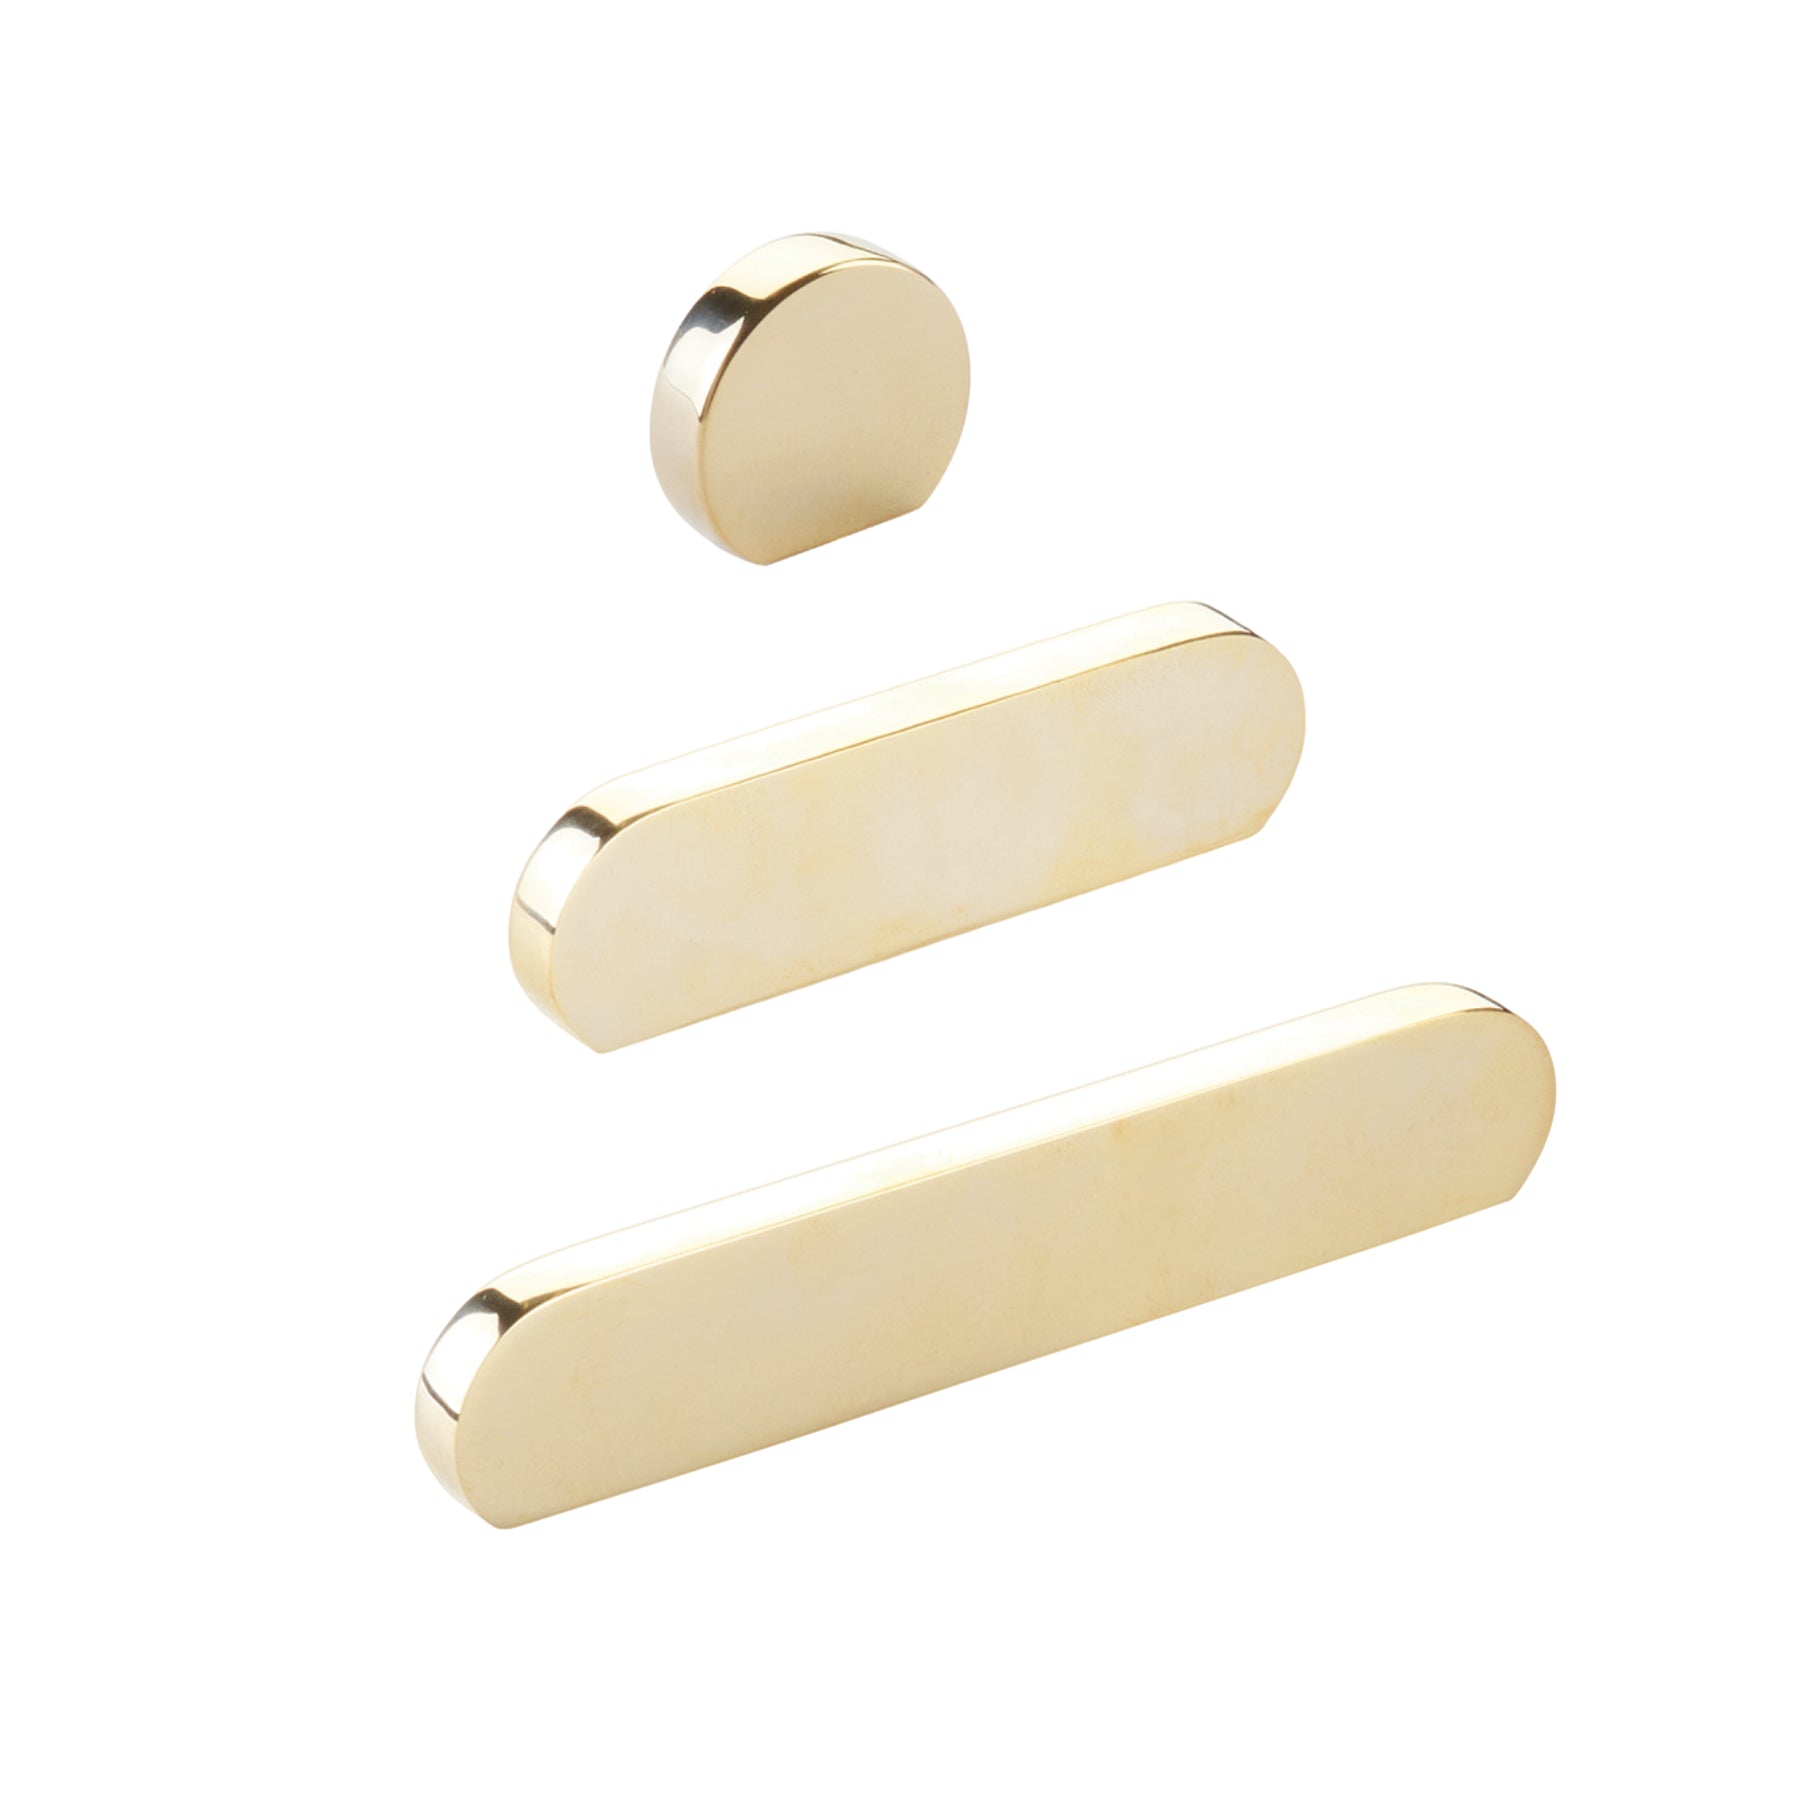 Unlacquered Brass "Bit" Rounded Drawer Pulls and Cabinet Knobs - Forge Hardware Studio